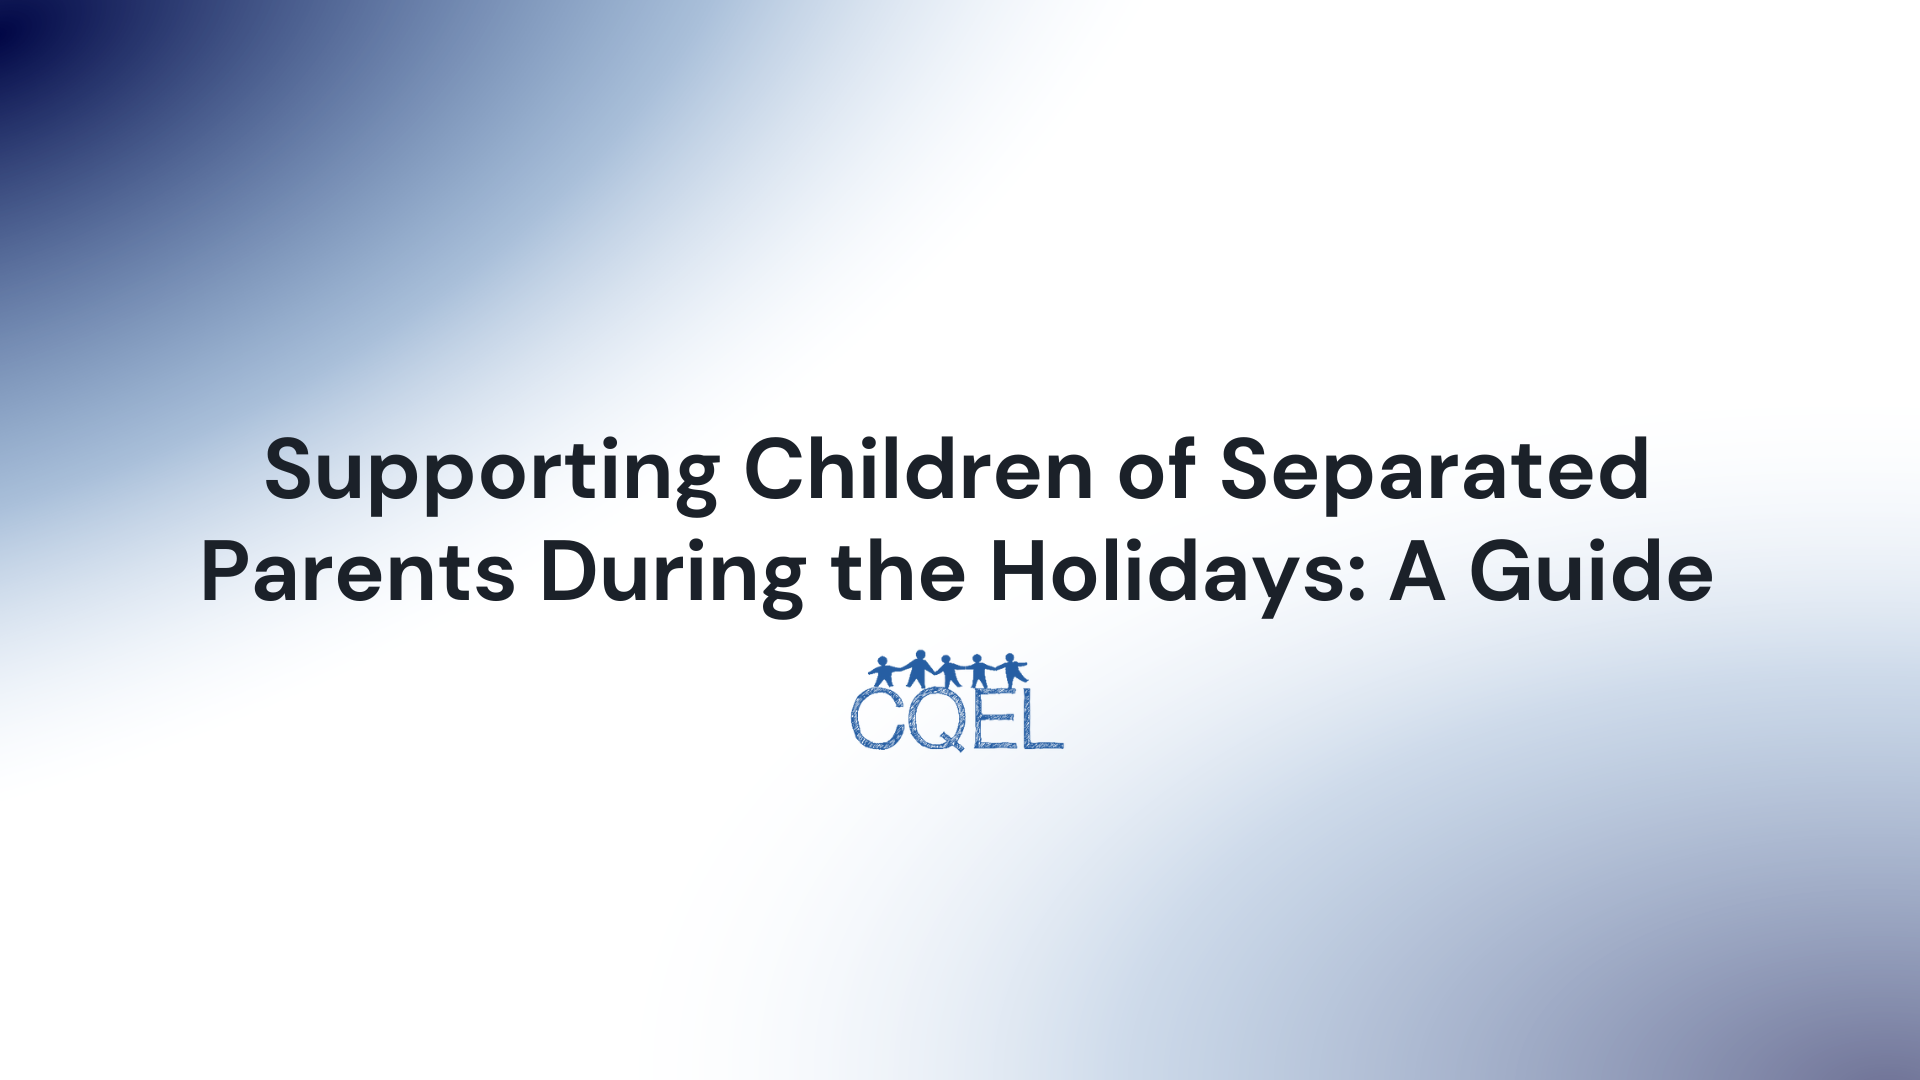 Supporting Children of Separated Parents During the Holidays: A Guide